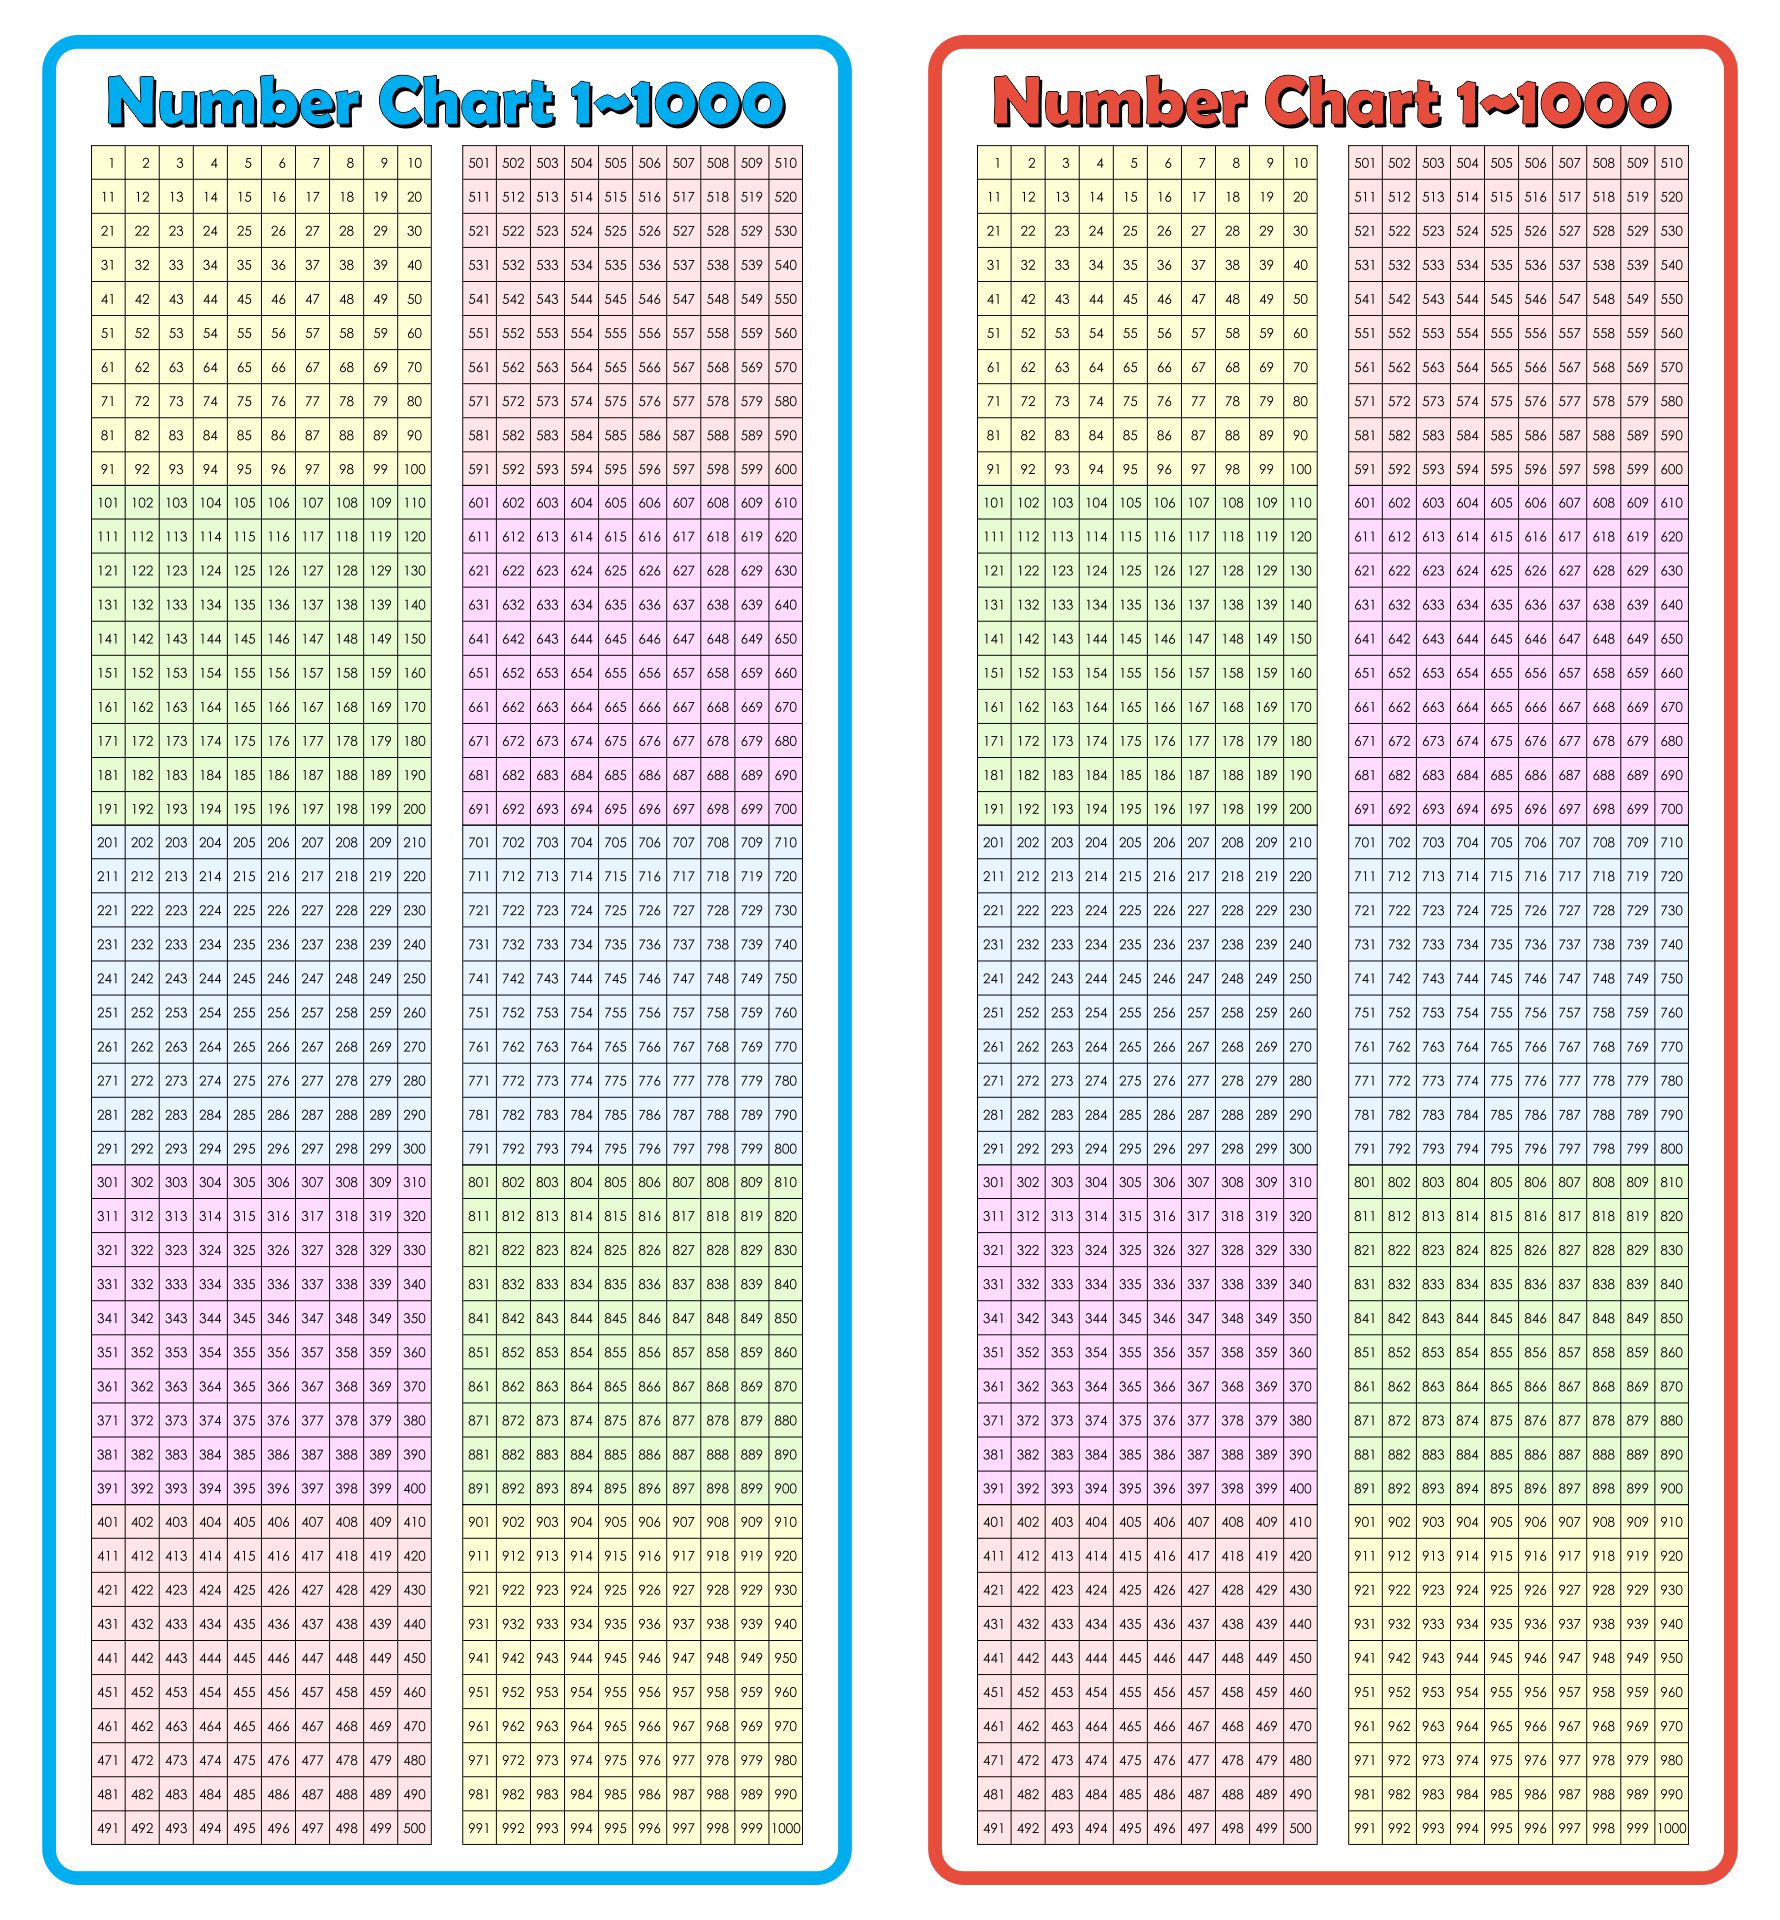 Number Chart 1-1000